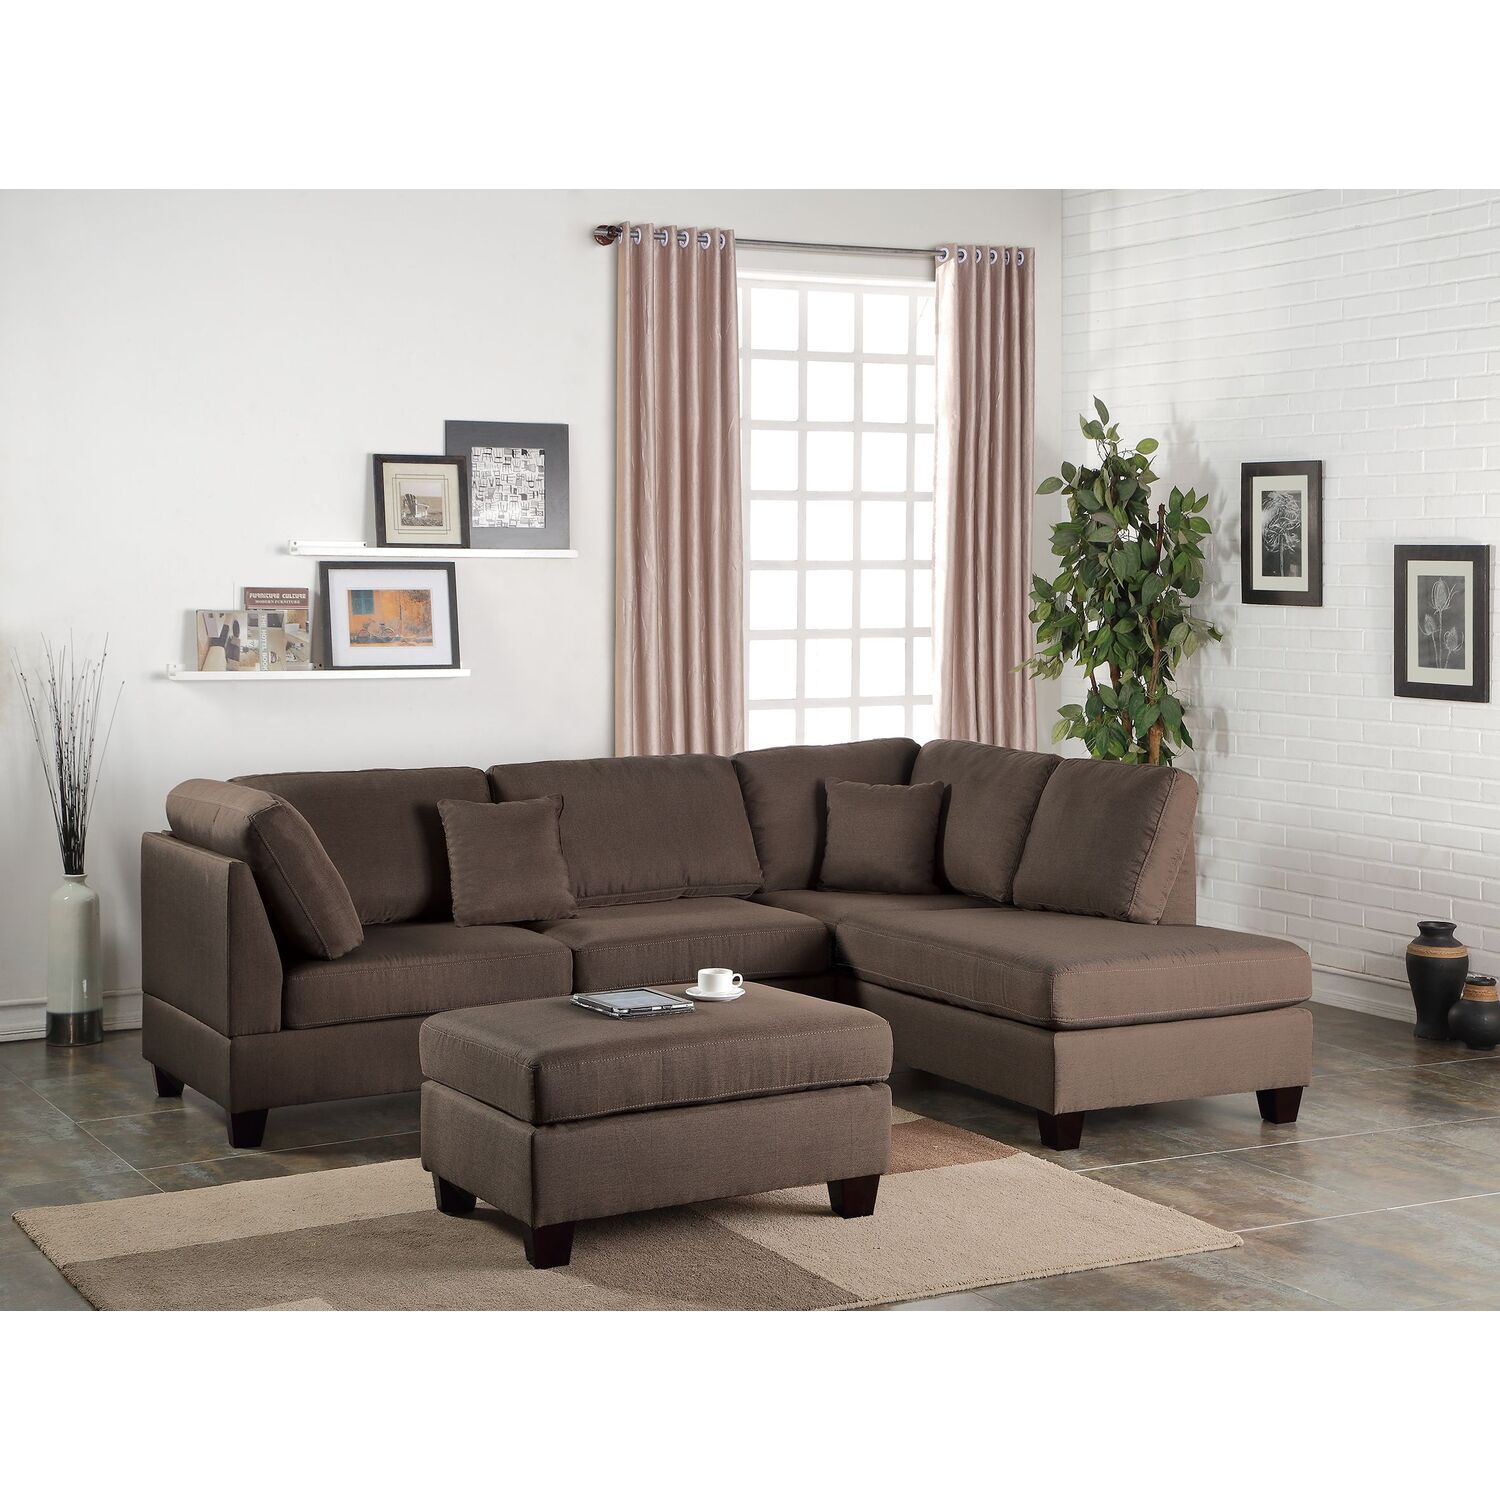 Indulge in Comfort with a Chocolate Brown Sectional Sofa with Chaise